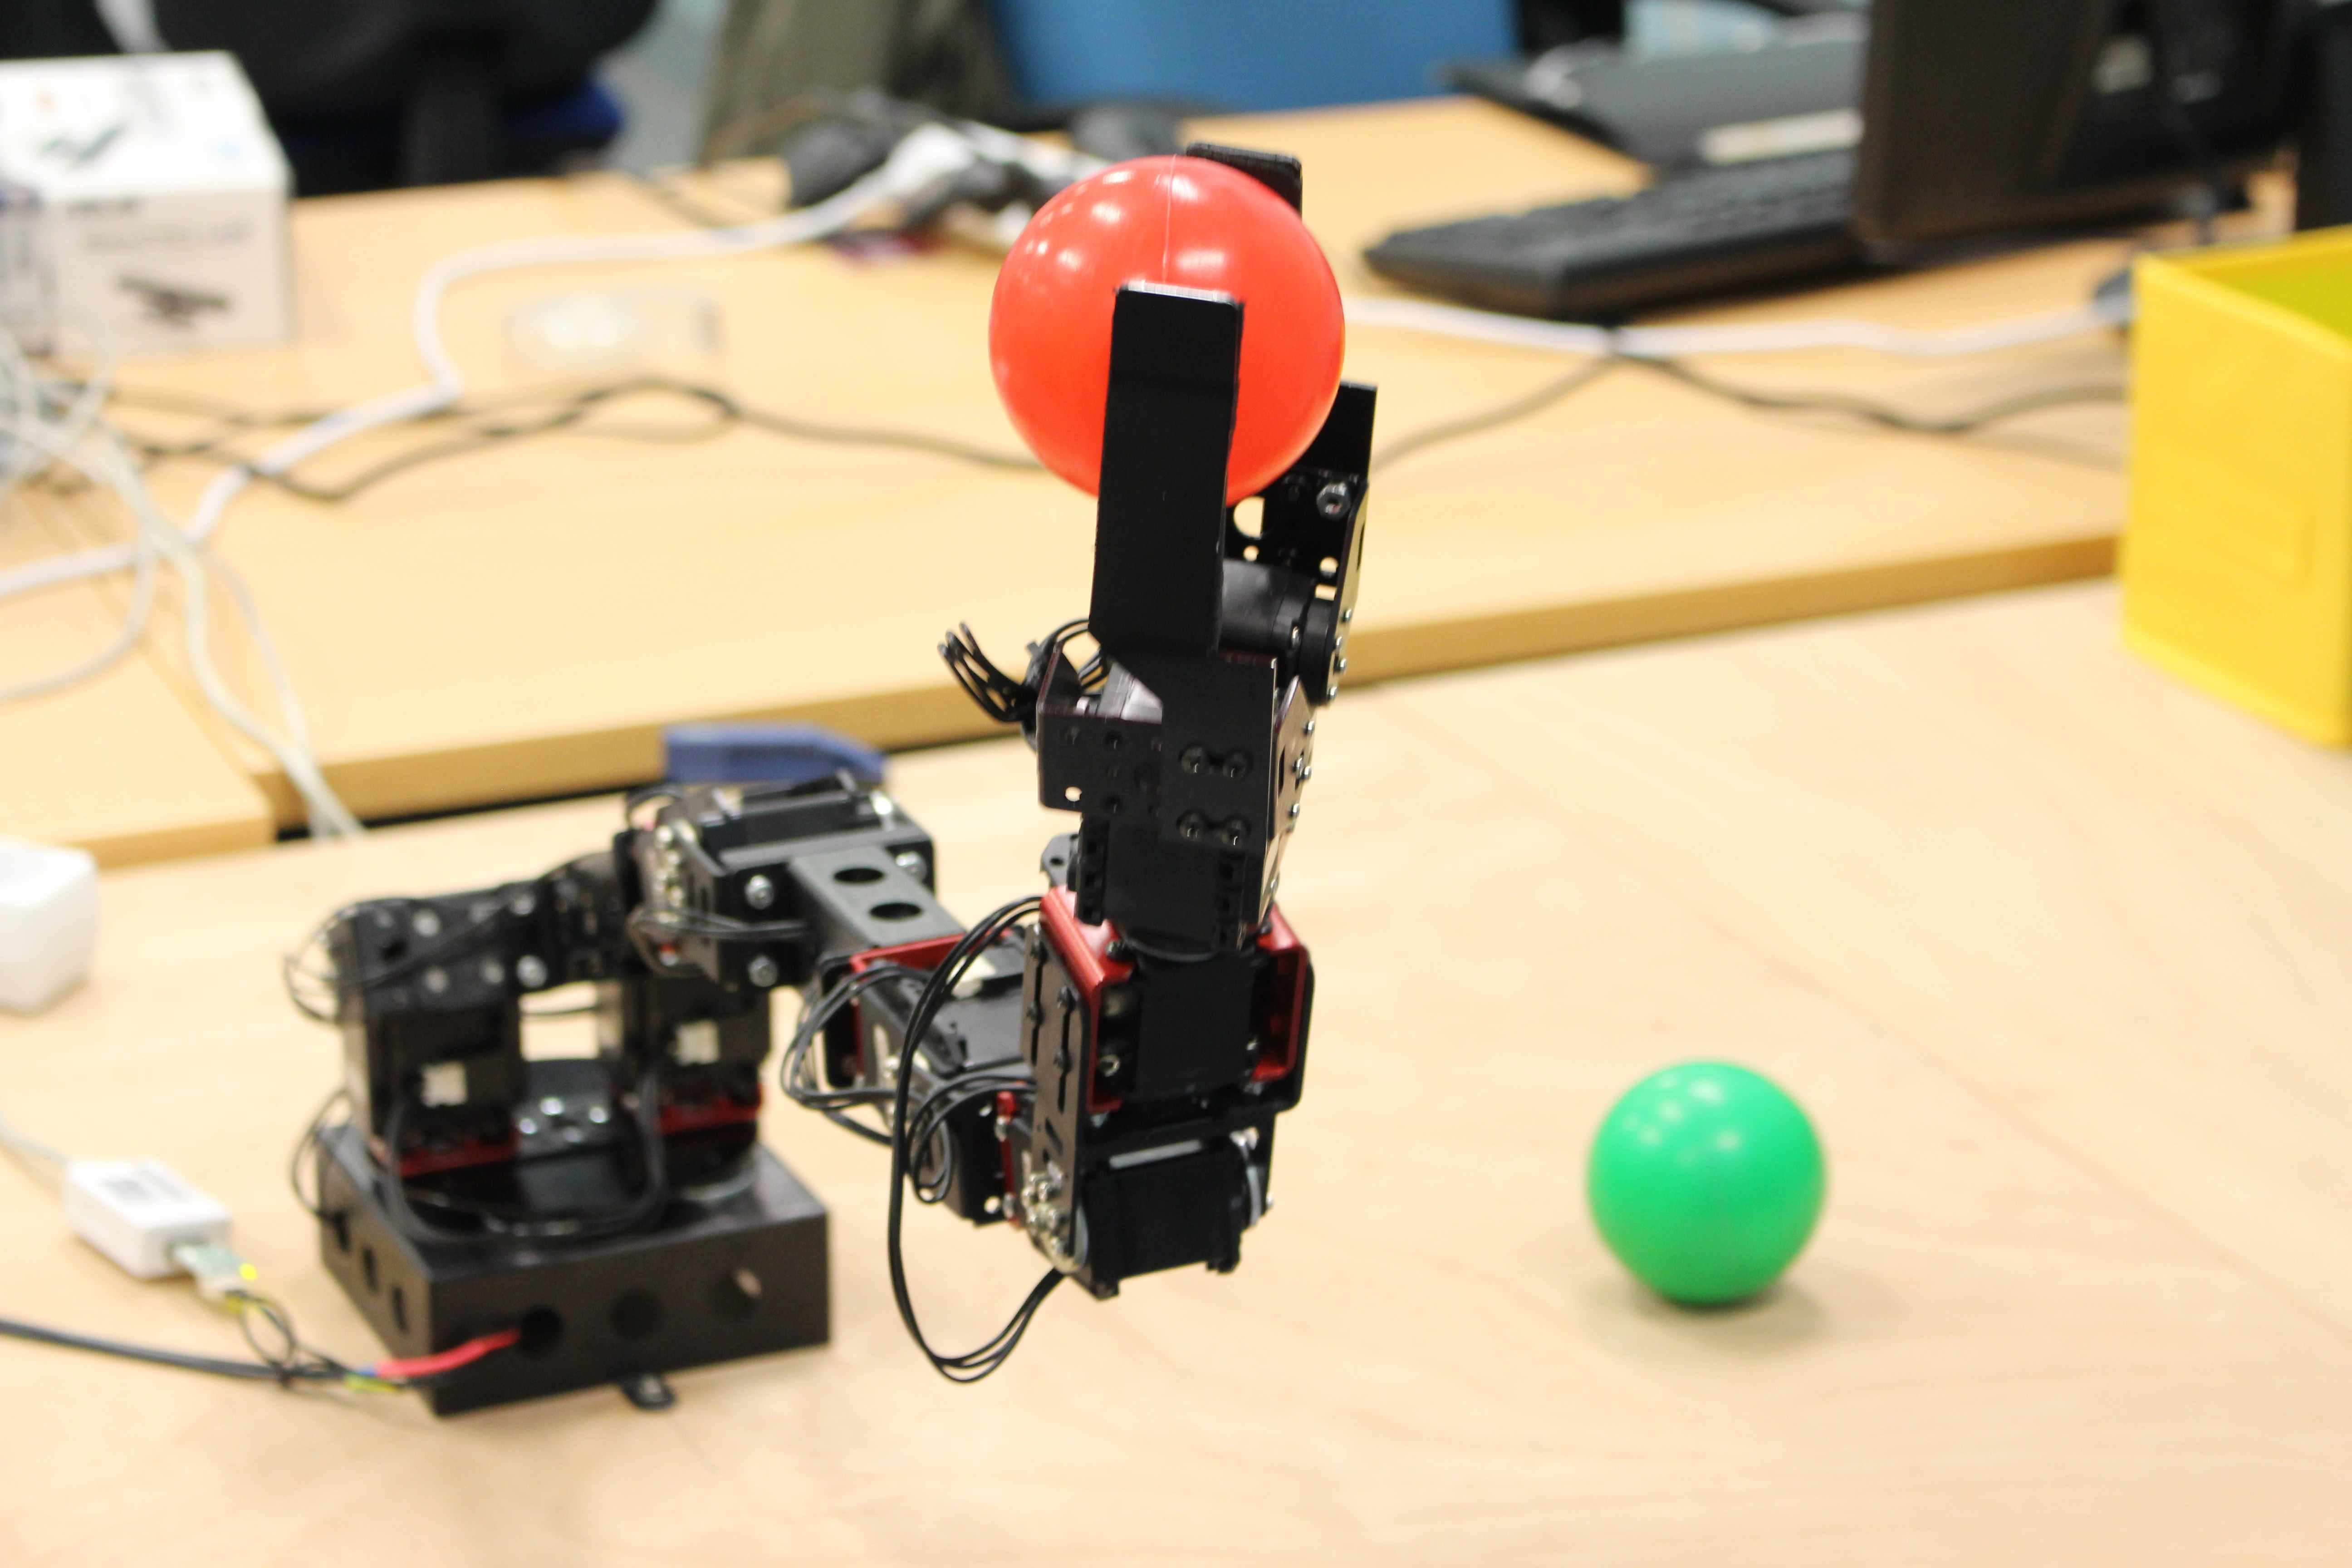 This robotic arm can learn simple object manipulations, like picking up plastic balls. Image courtesy of the DREAM consortium